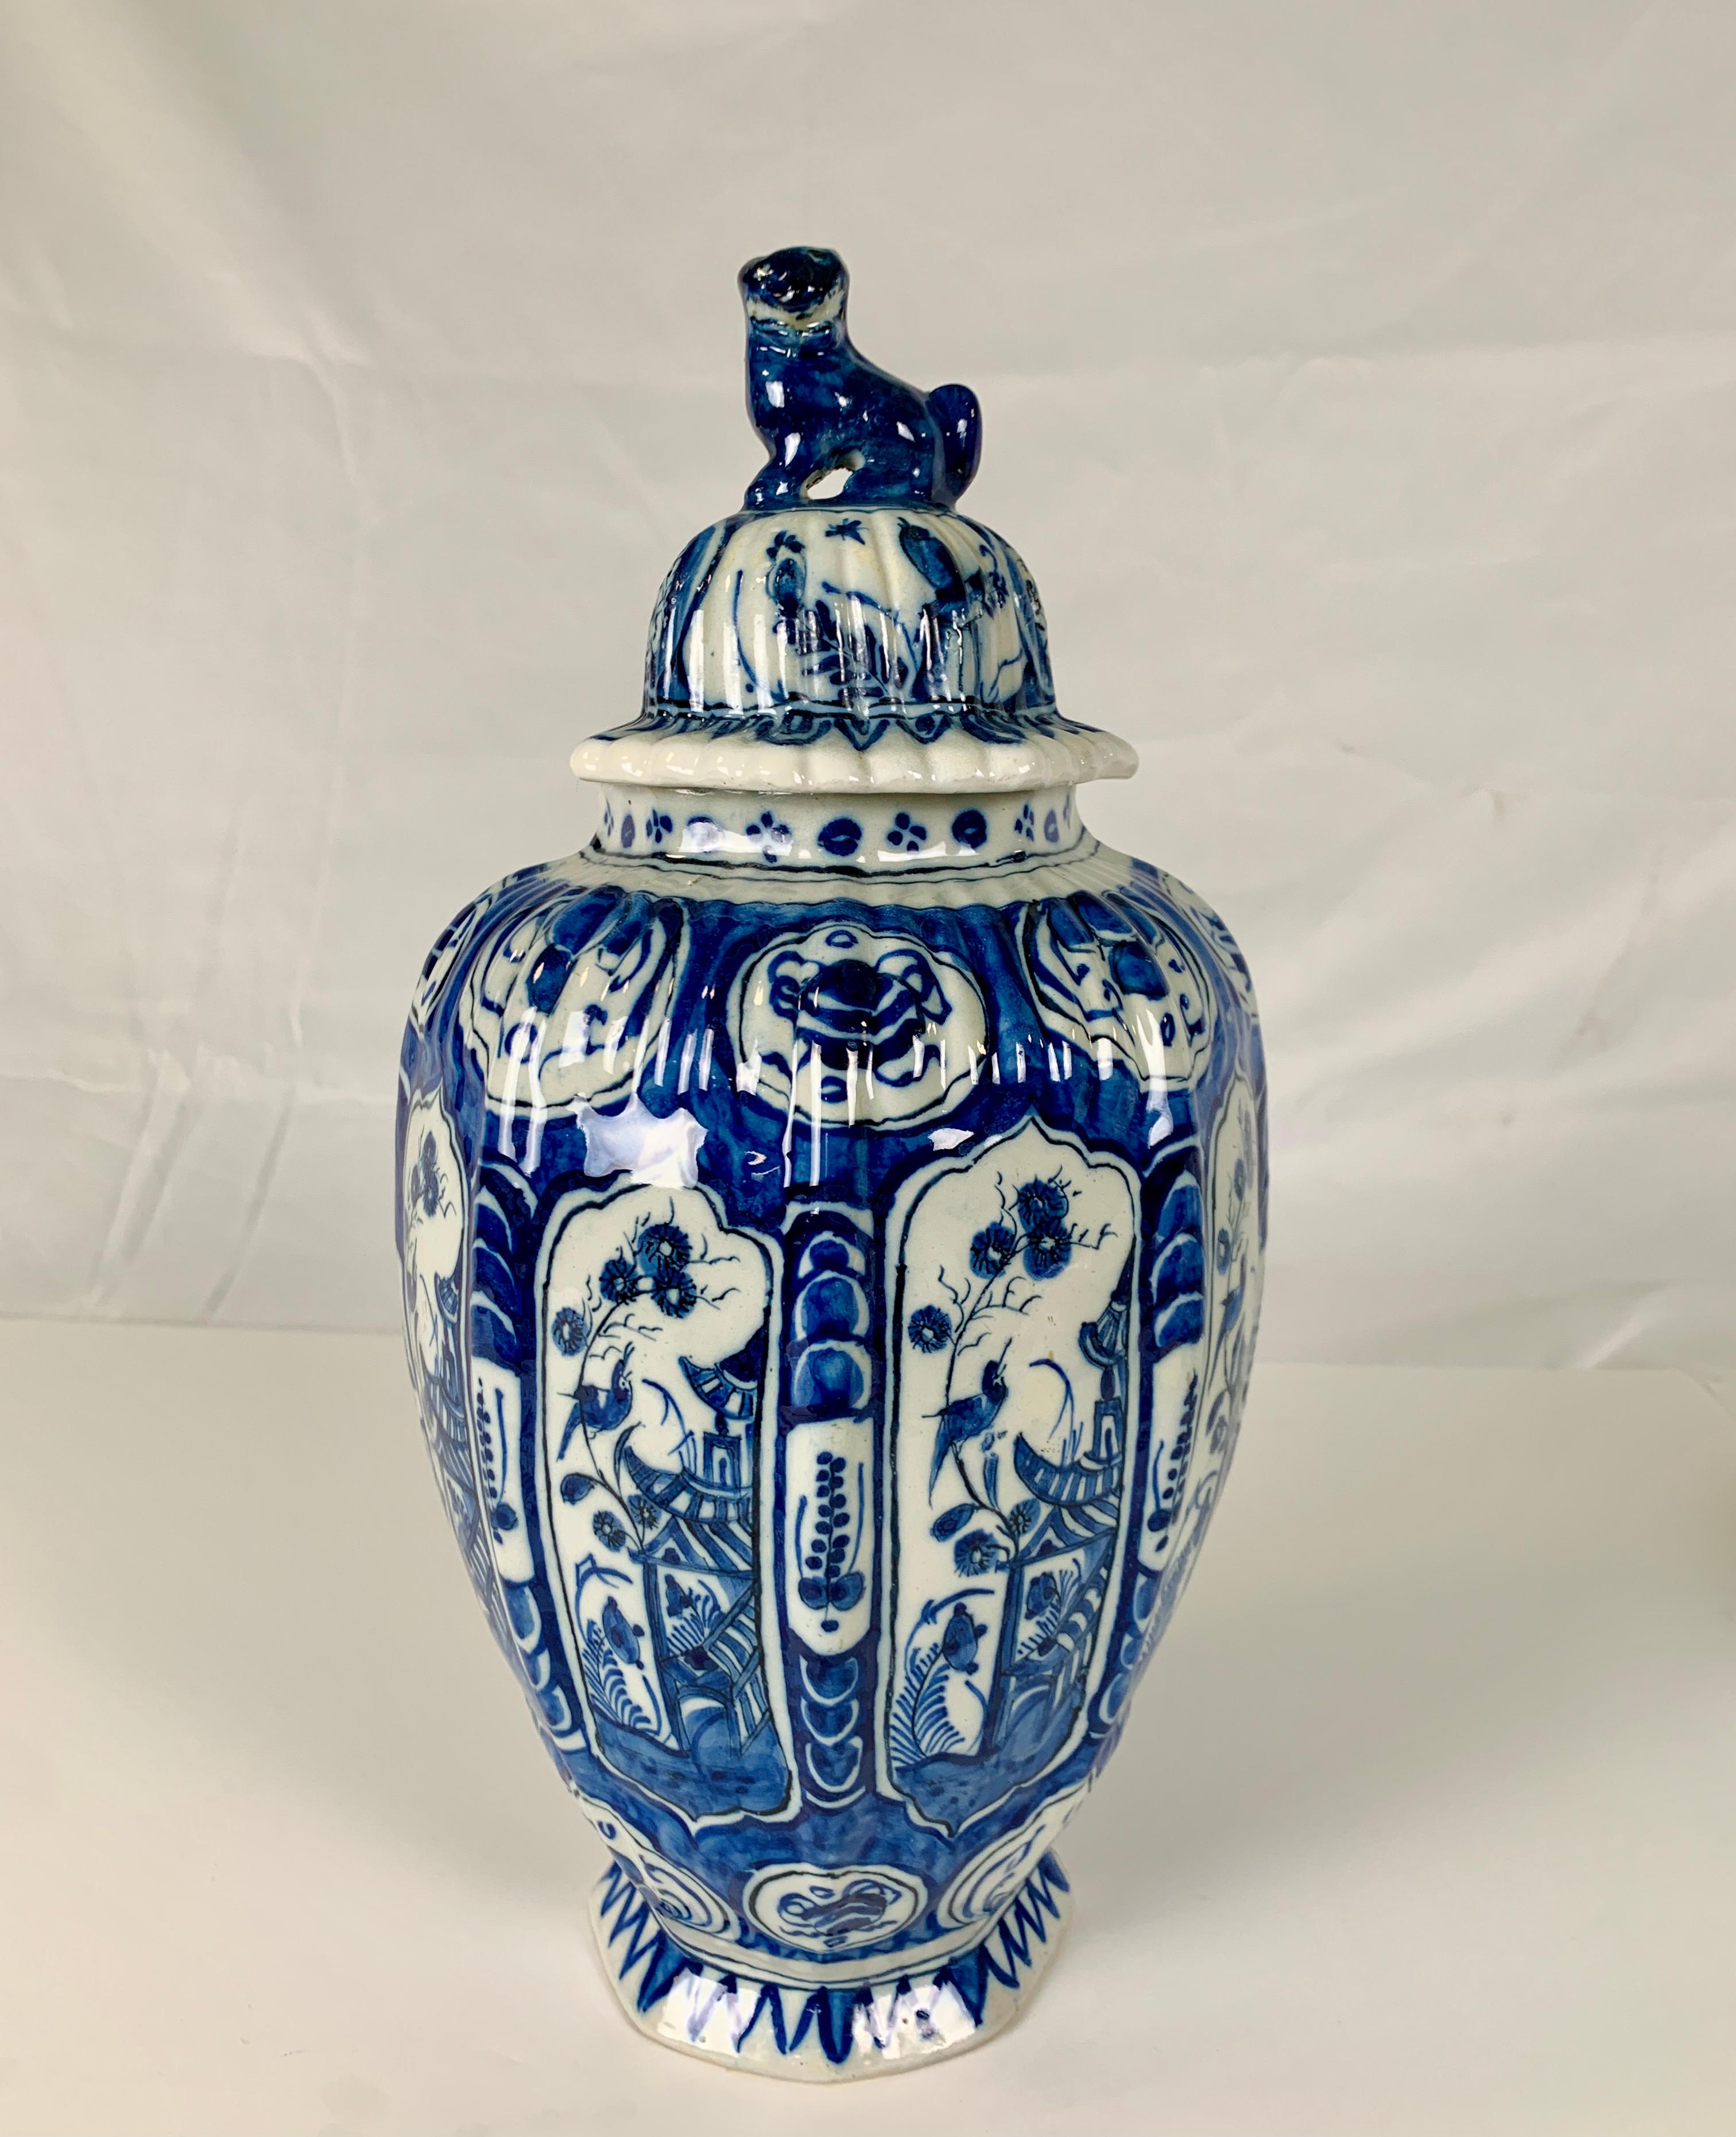 Group of Large Dutch Delft Jars and Vases 18th-19th and 20th Centuries 5